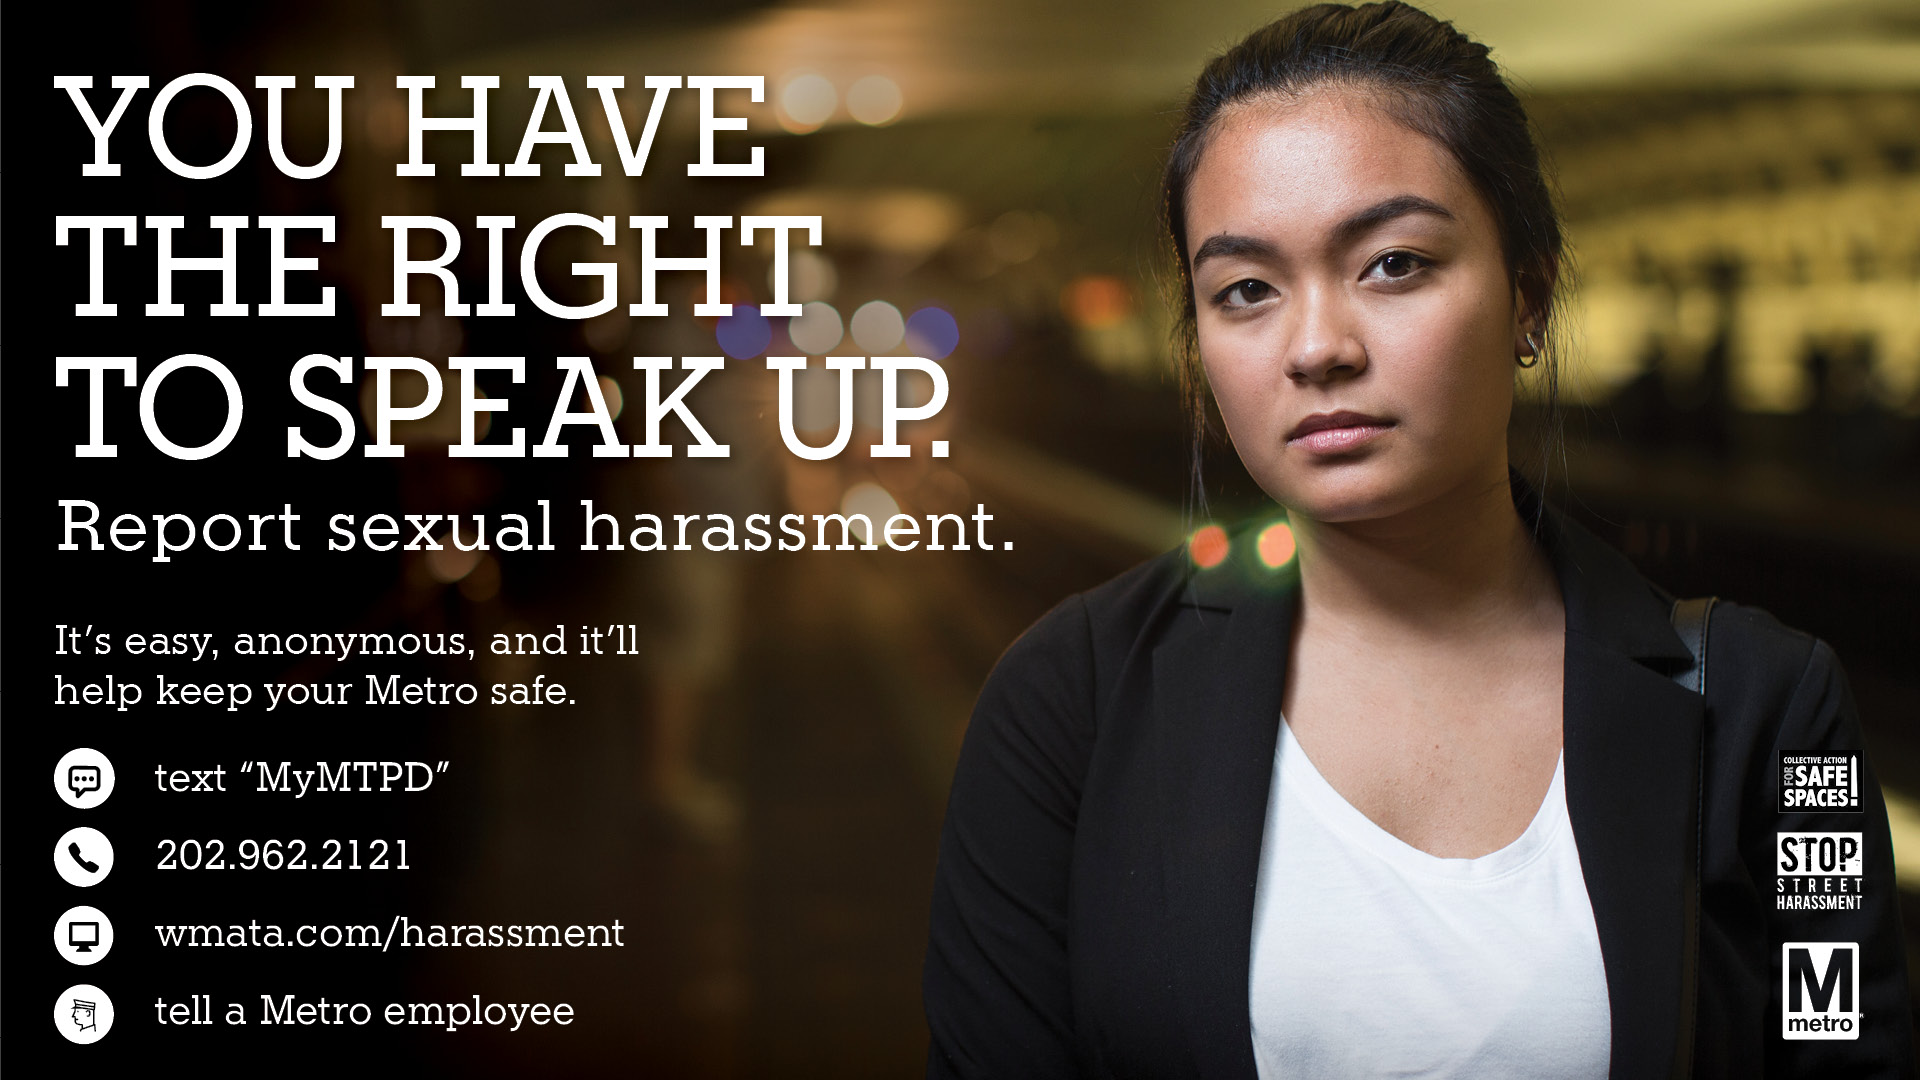 Local Advocacy Groups And Police Team Up To Raise Awareness About Sexual Harassment Wmata 0057